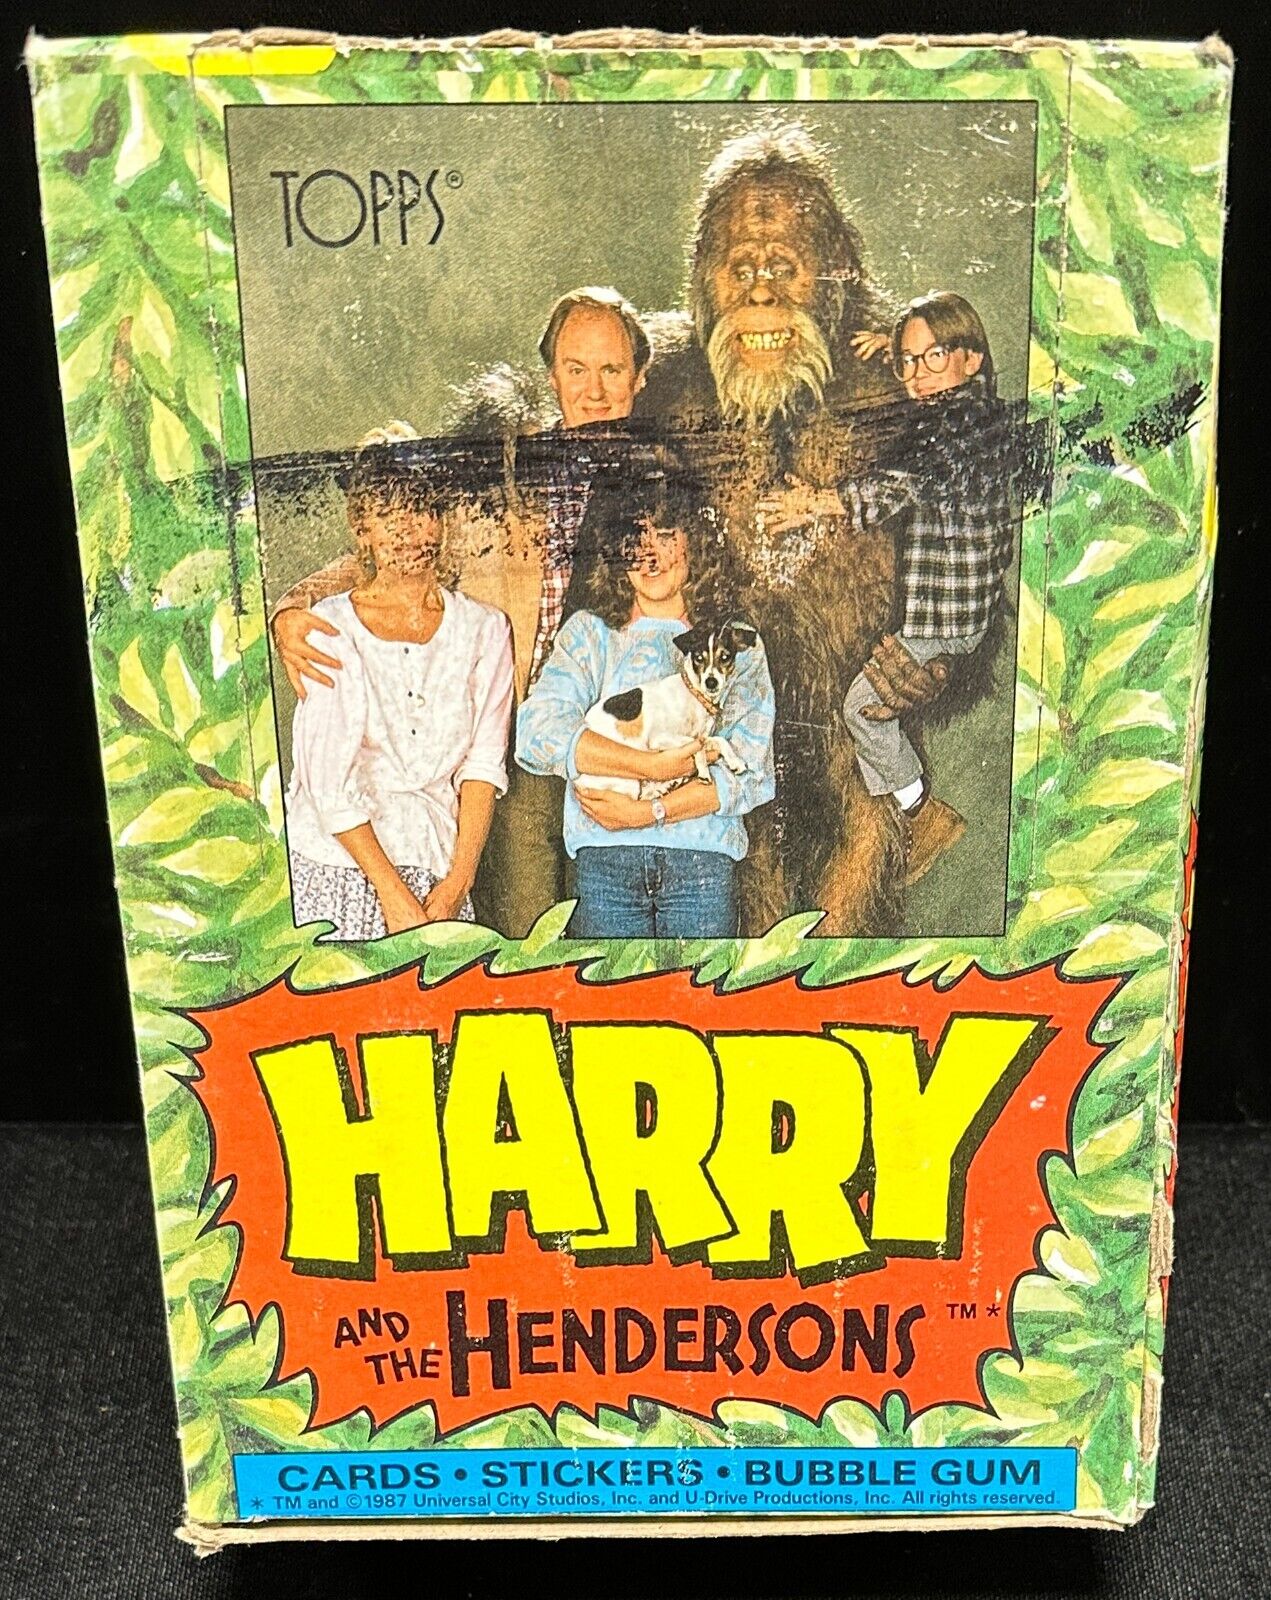 1987 Topps Harry and the Hendersons Cards, Stickers, Bubble Gum in Box, 36 Ct.